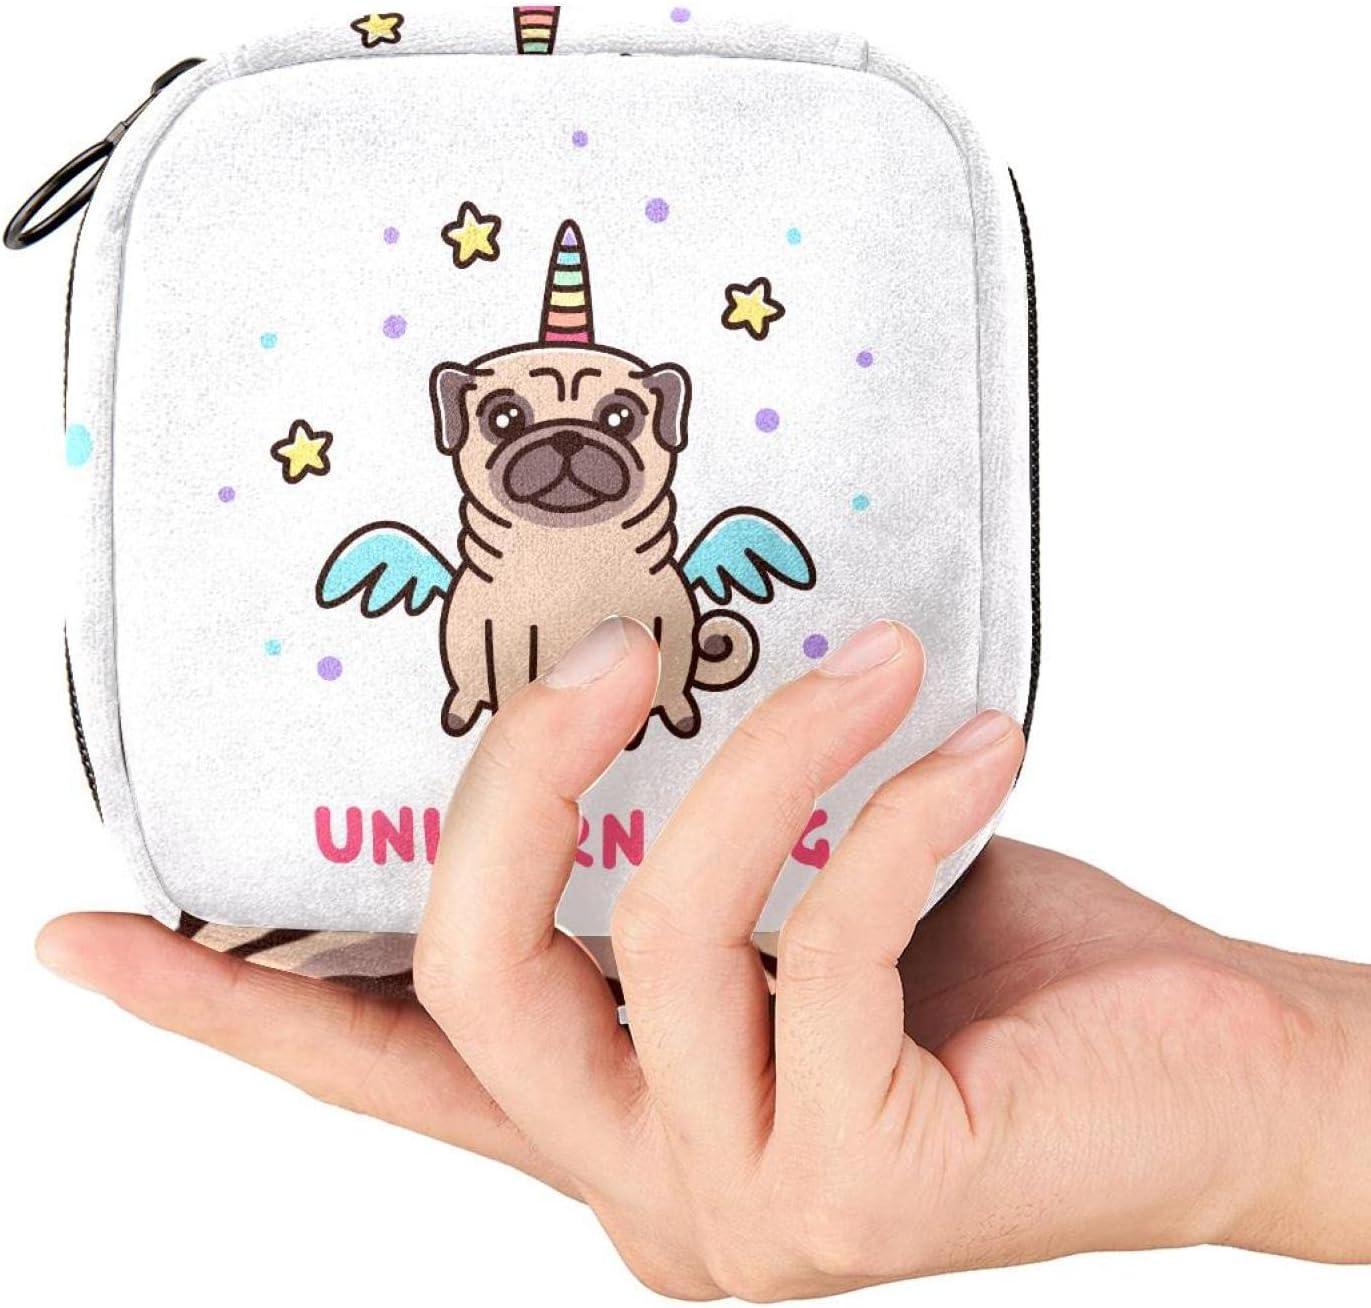 Period Pouch Portable Tampon Storage Bag,Tampon Holder for Purse Feminine  Product Organizer,Unicorn Cute